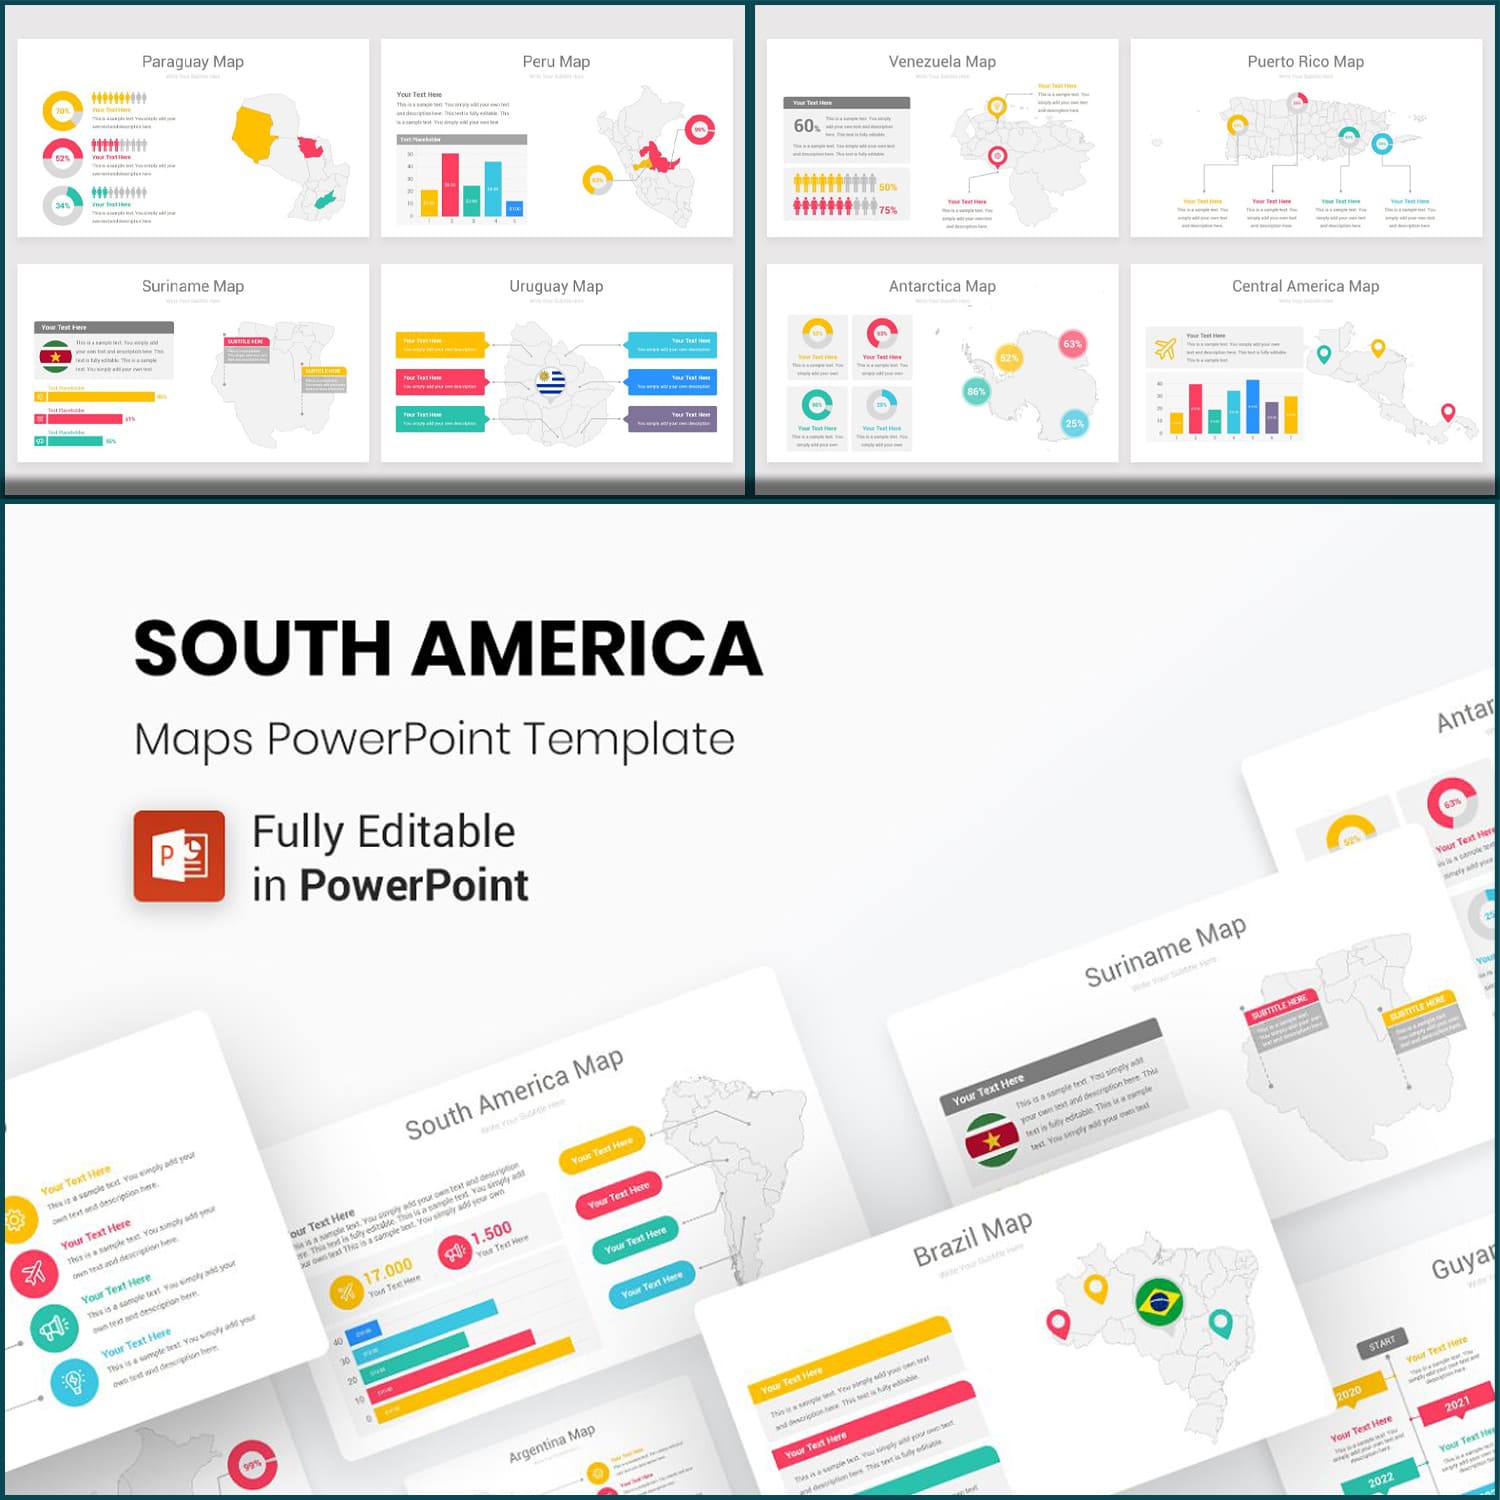 south america maps powerpoint template.